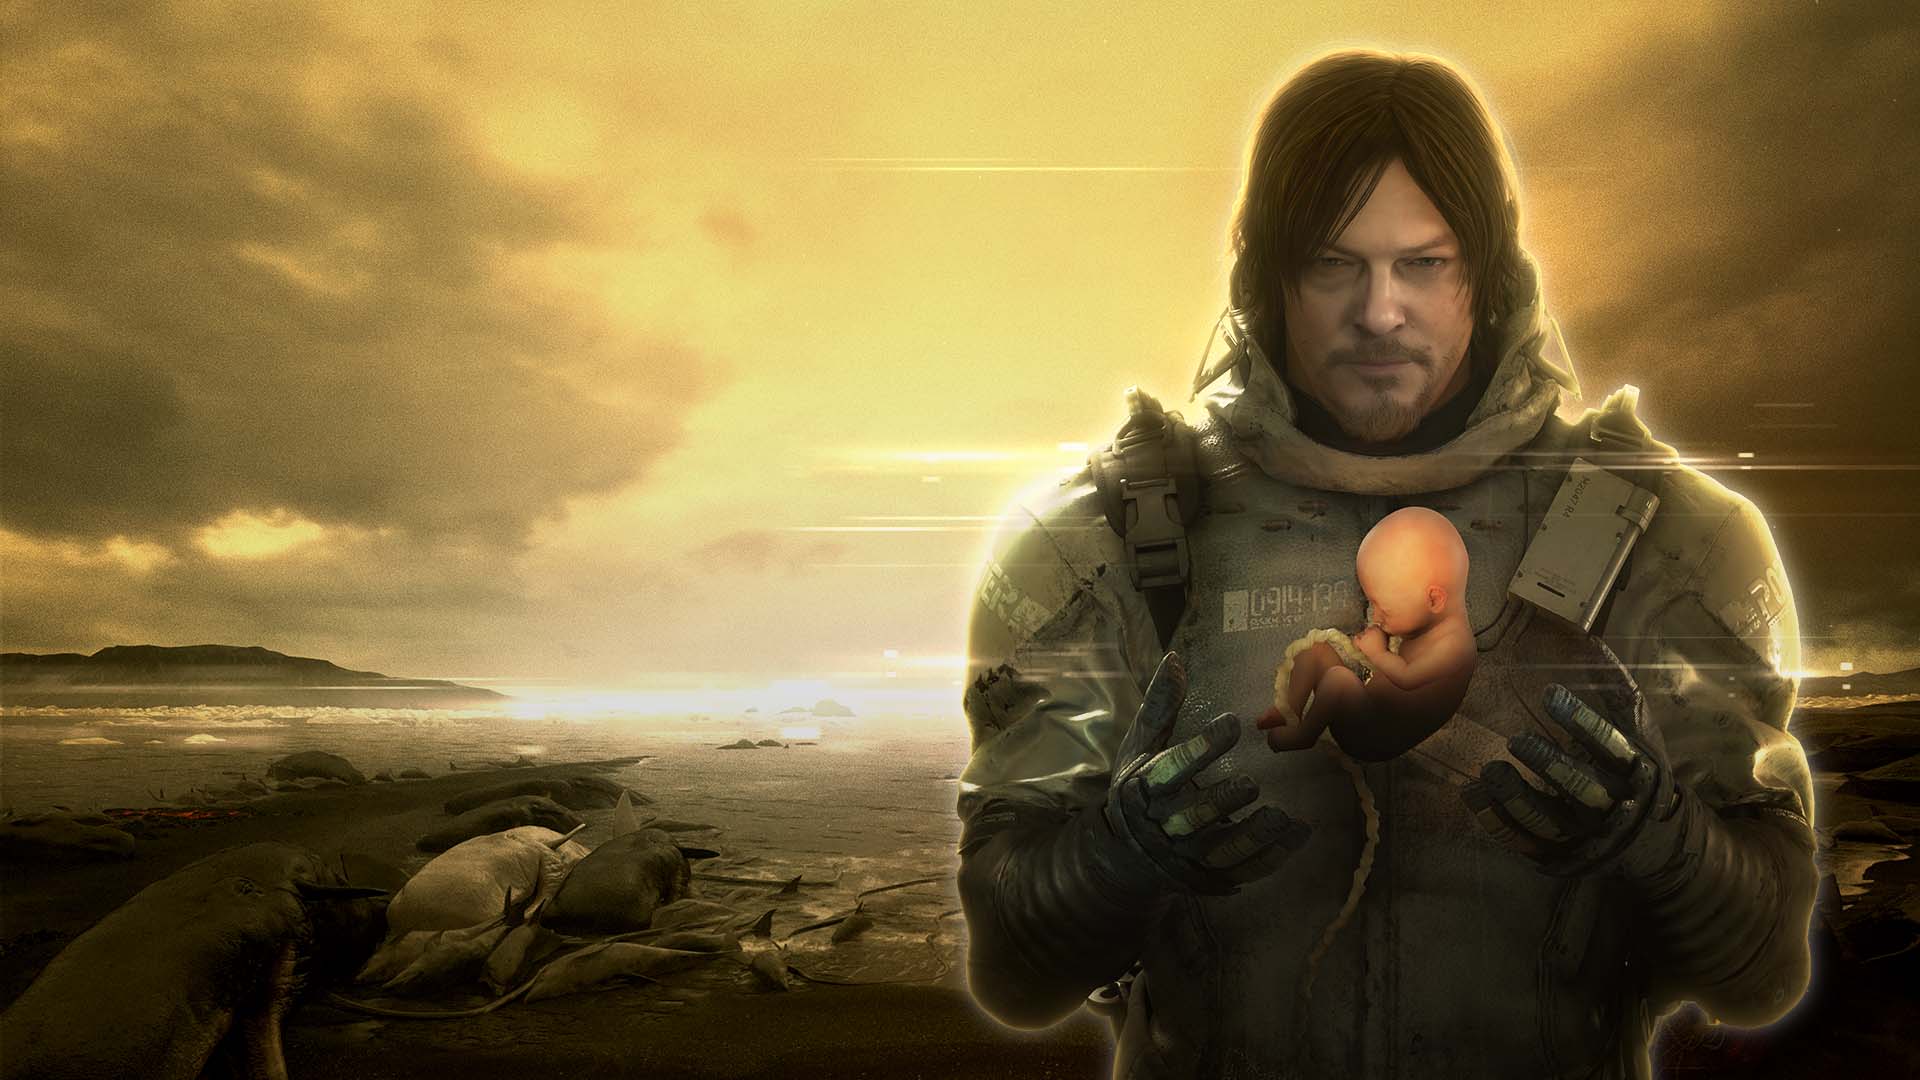 DEATH STRANDING COMES TO PC